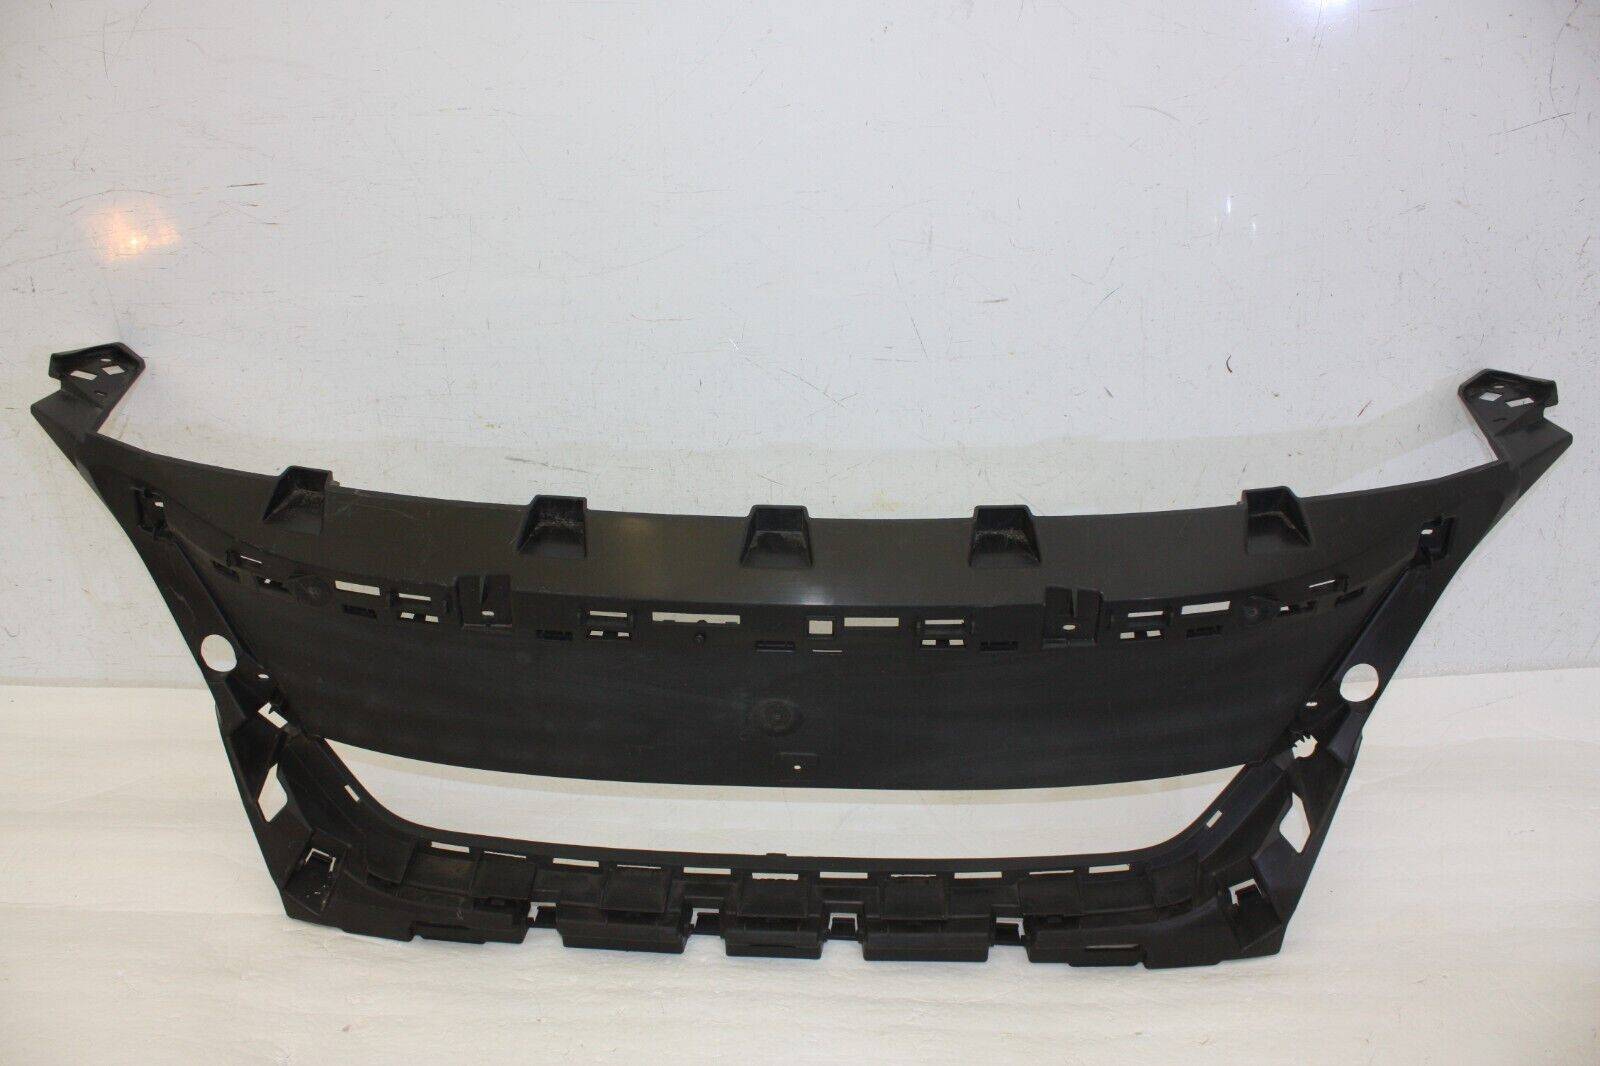 Peugeot-3008-Front-Bumper-Grill-Bracket-2017-to-2021-9815317777-Genuine-176268720878